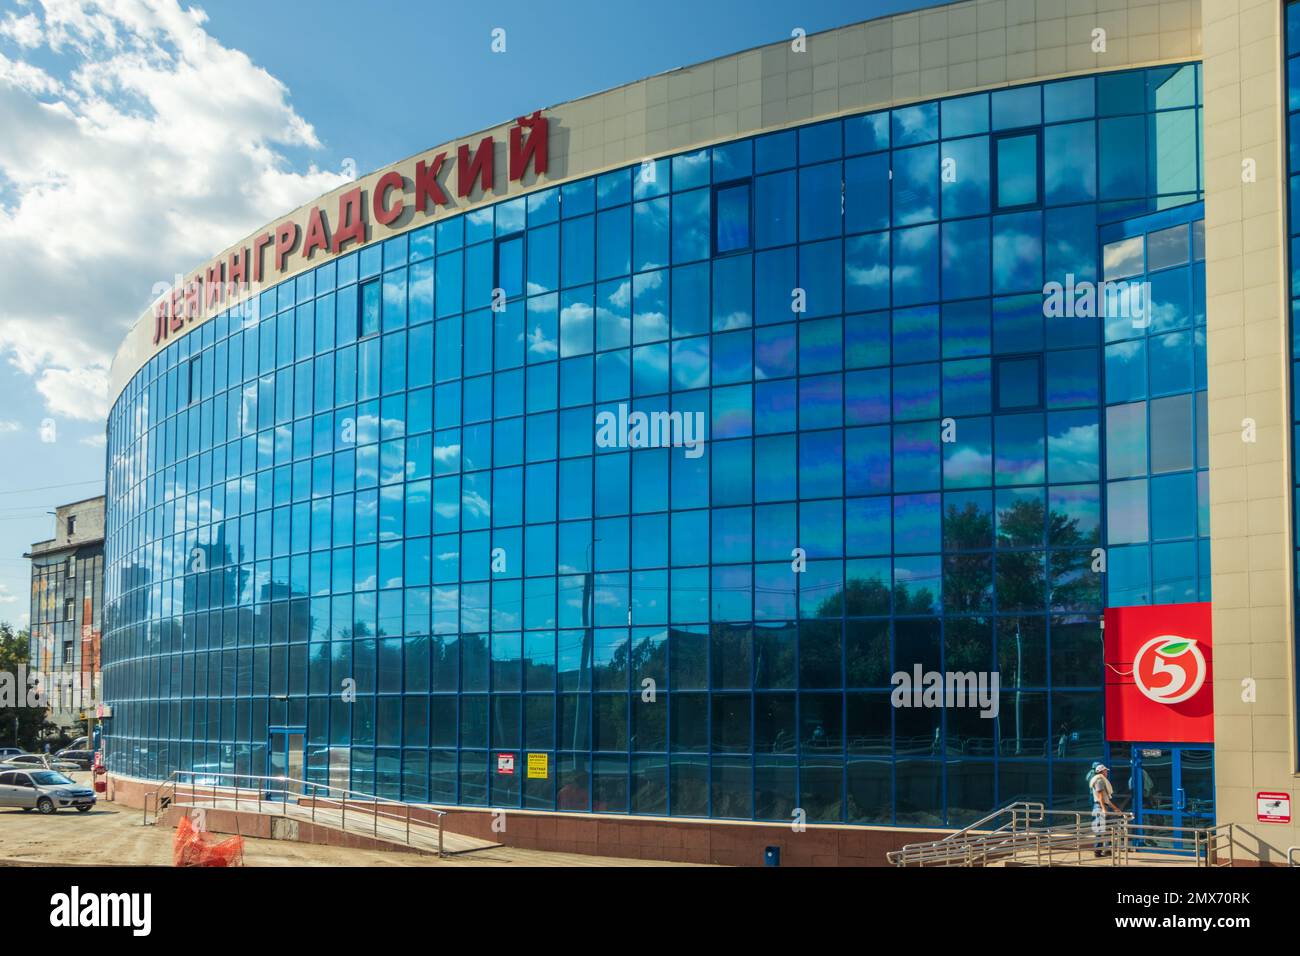 Chelyabinsk, Russia - August 16, 2022. The sky with clouds is reflected in the mirror windows of the building of the Leningradsky shopping center. Stock Photo